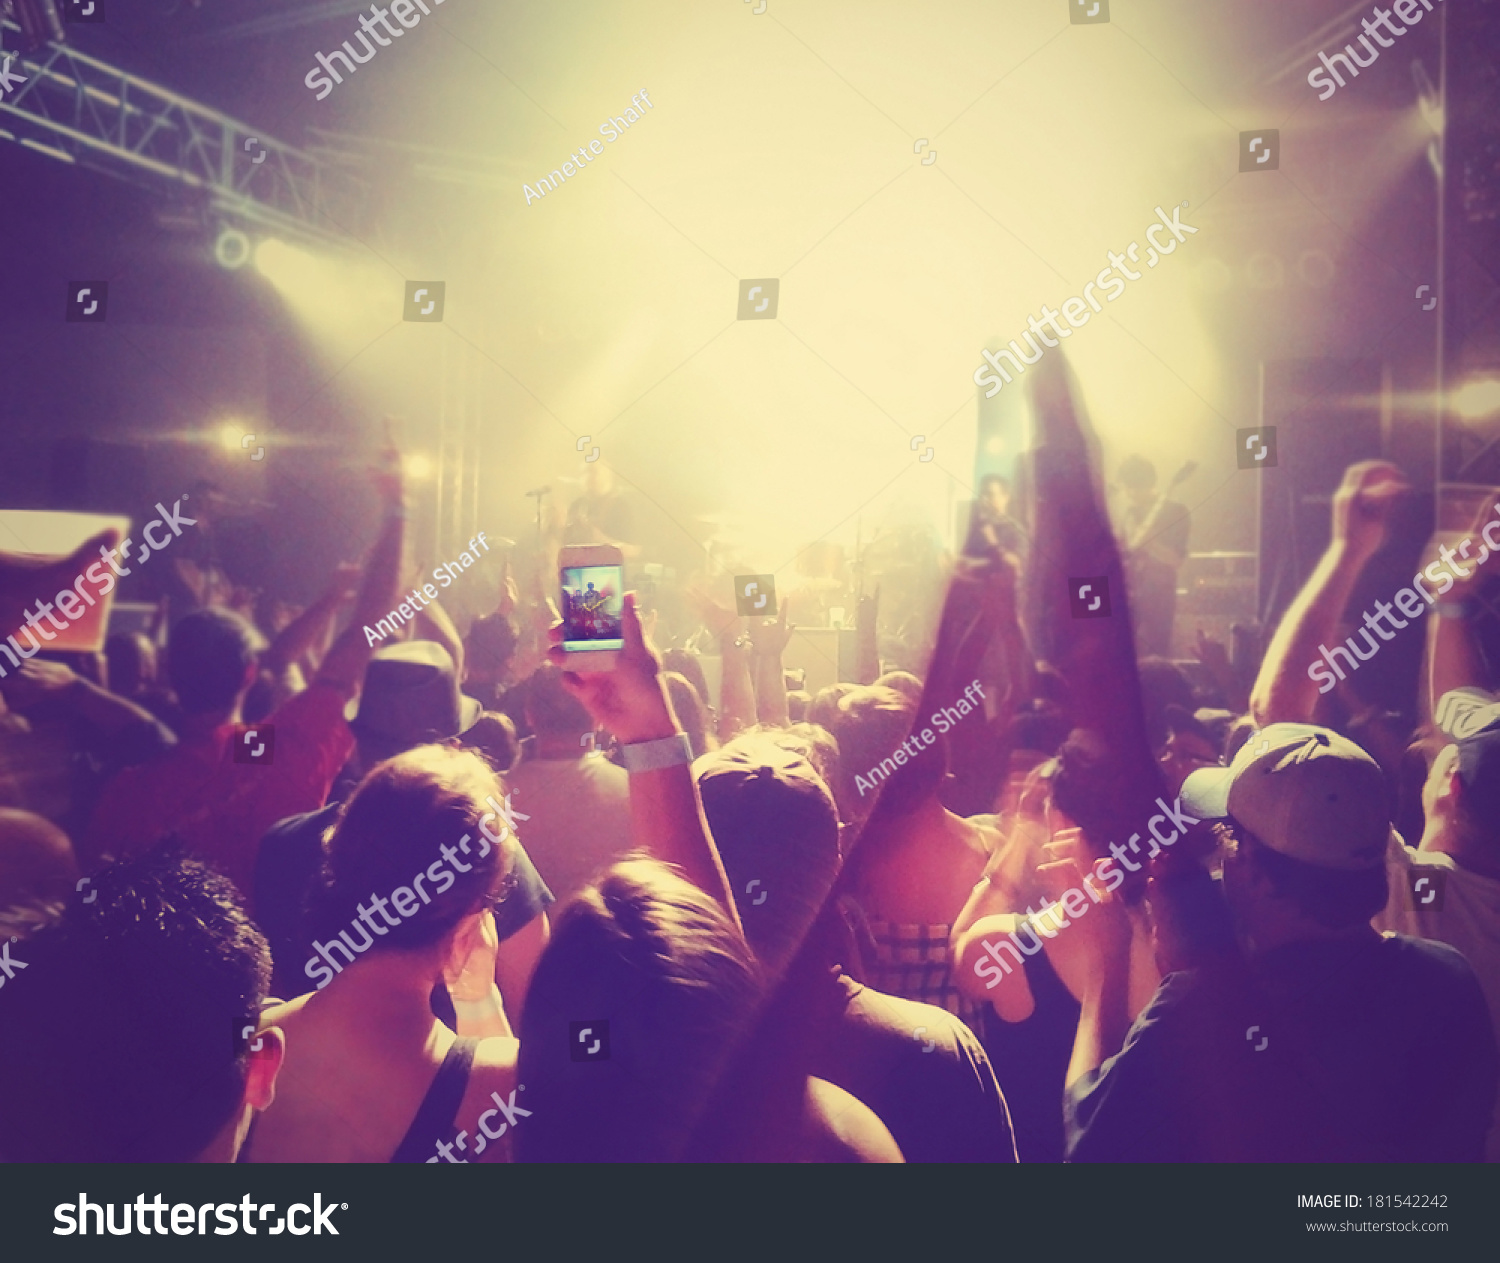 Crowd People Concert Done Instagram Like Stock Photo 181542242 ...